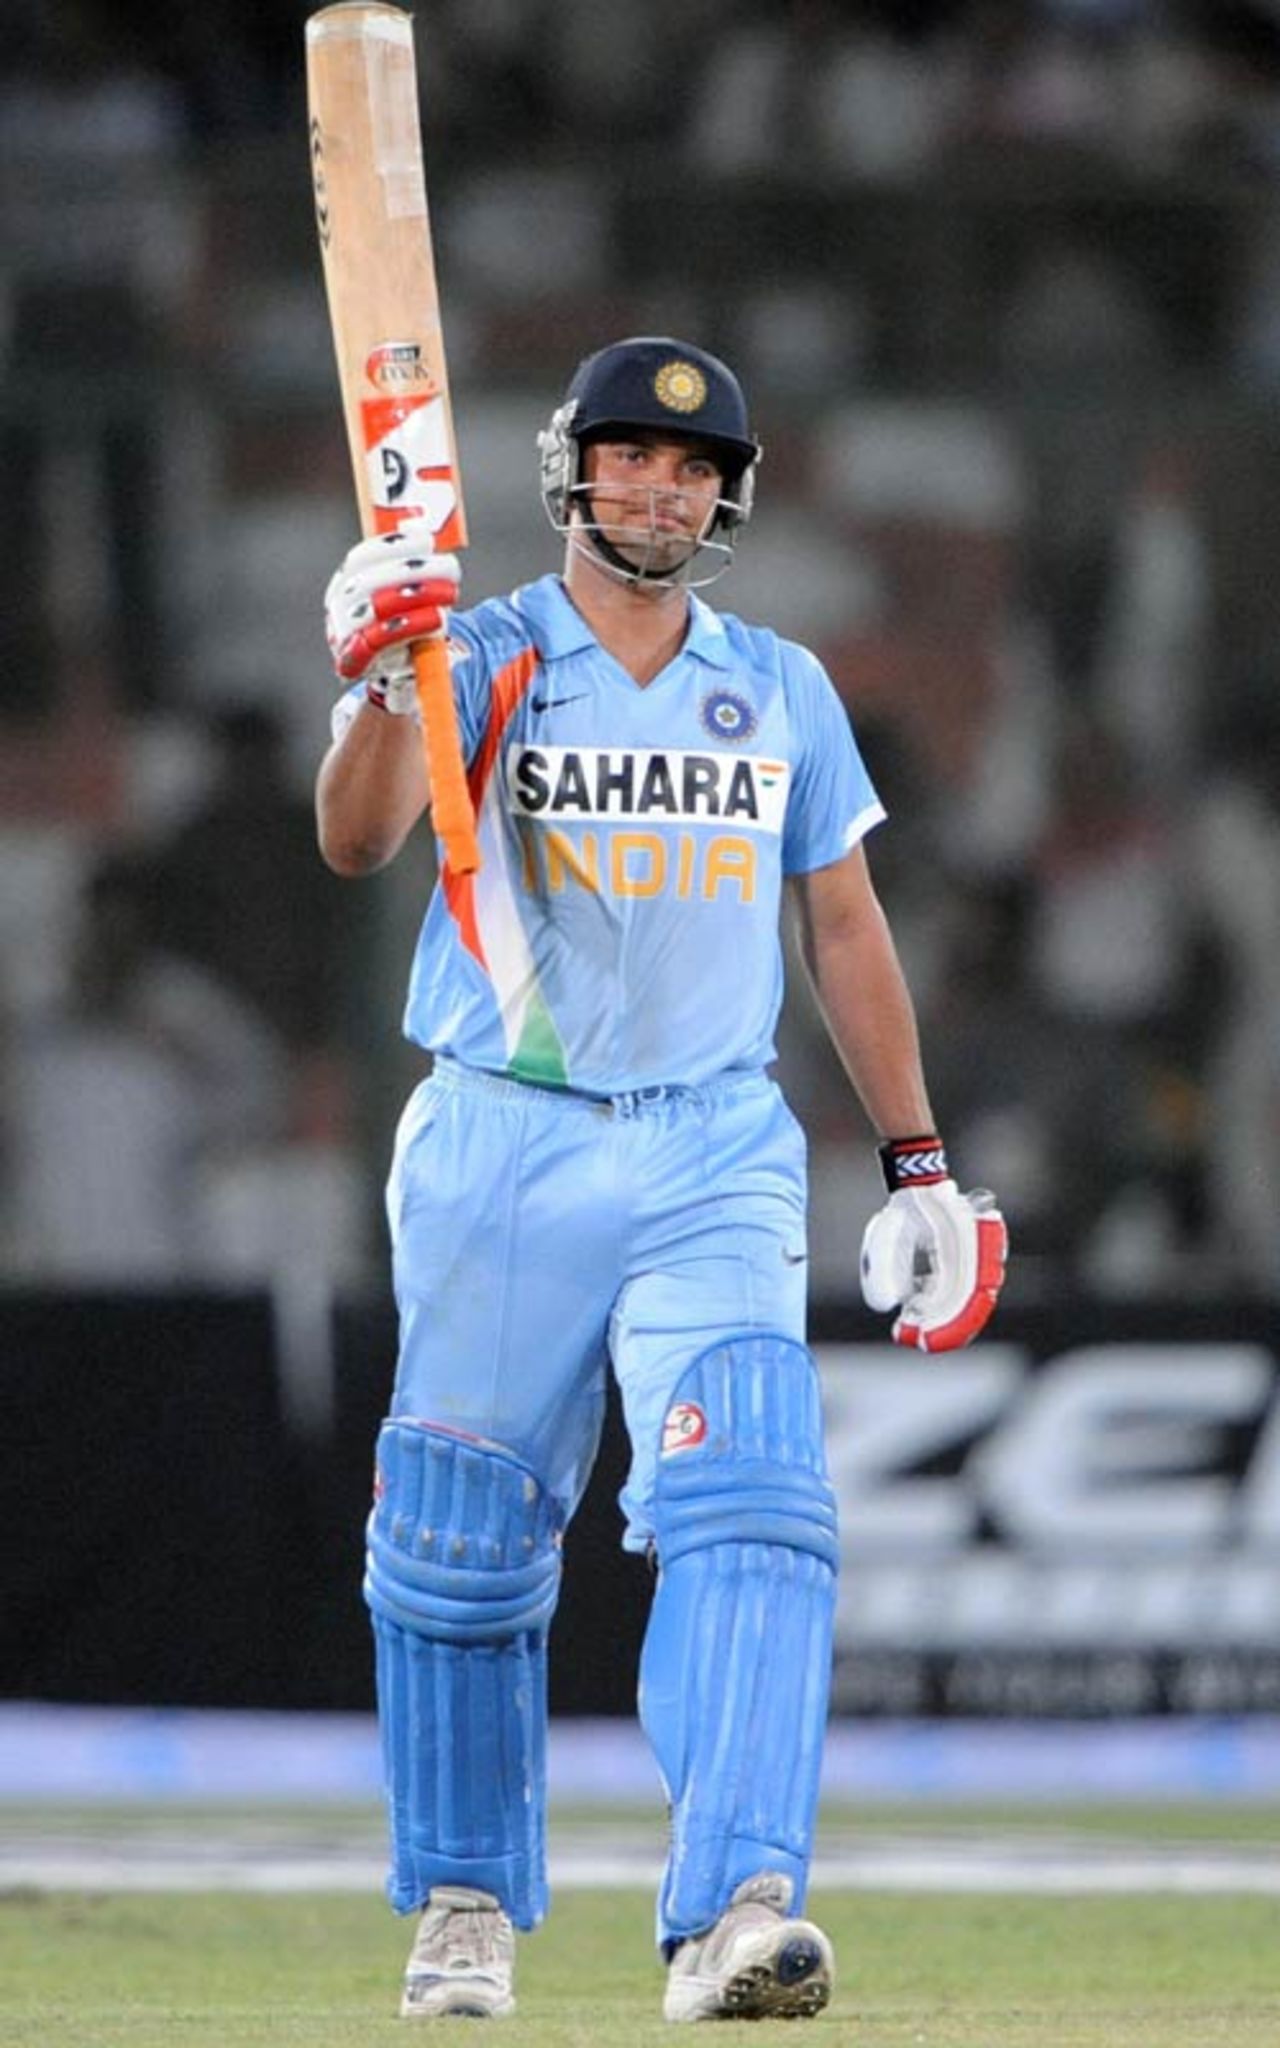 Suresh Raina acknowledges the cheers after reaching his fifty, Pakistan v India, Group B, Asia Cup, Karachi, June 26, 2008